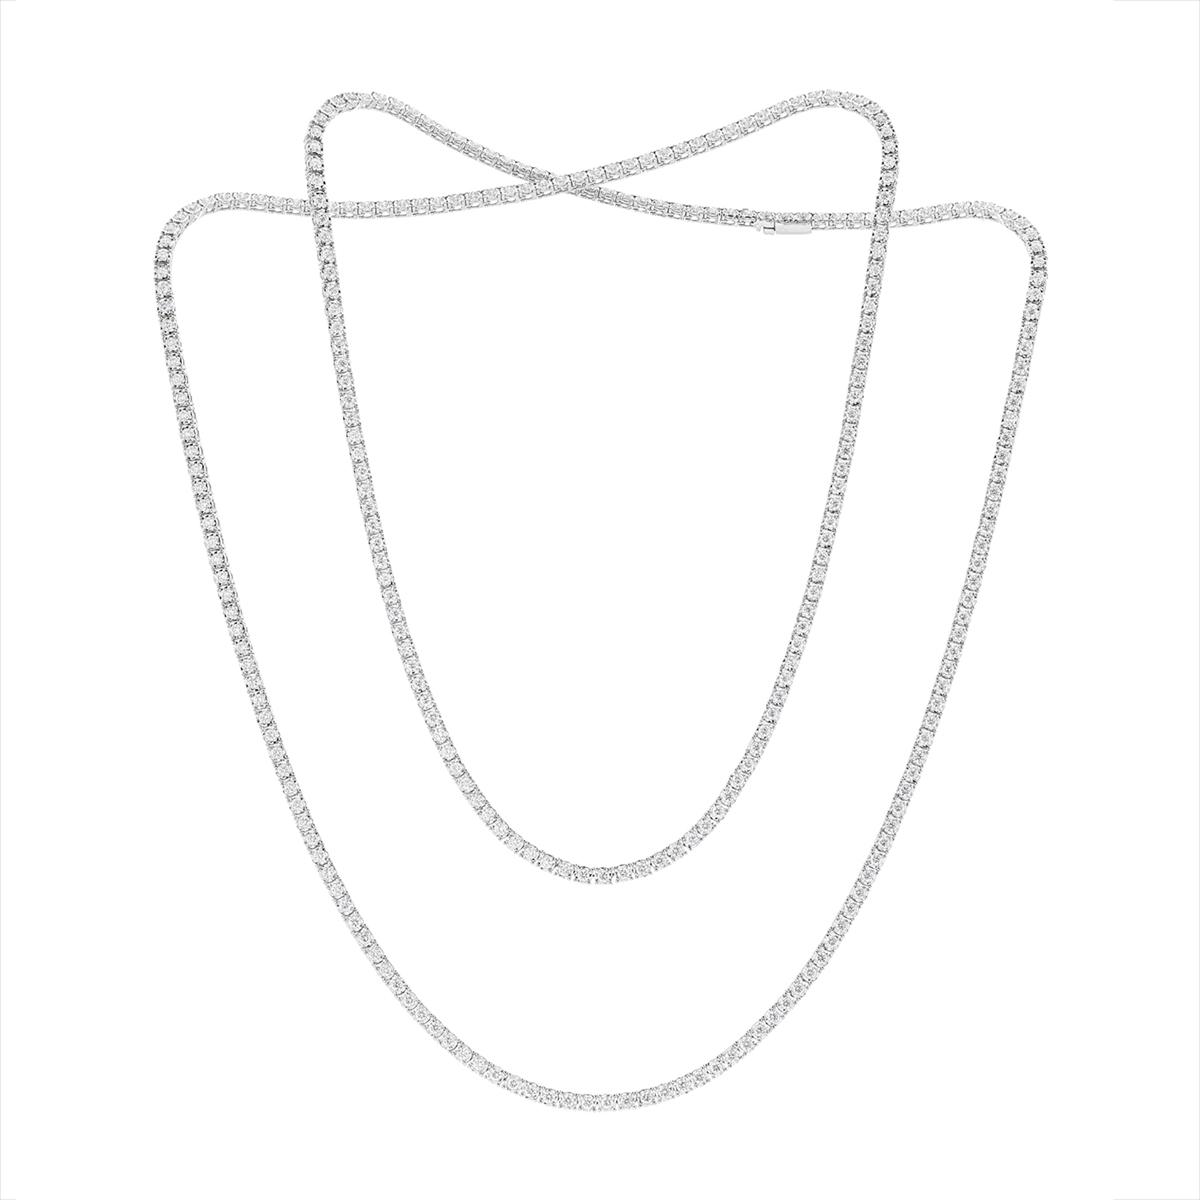 36 inches White Gold Diamond All-Around Necklace